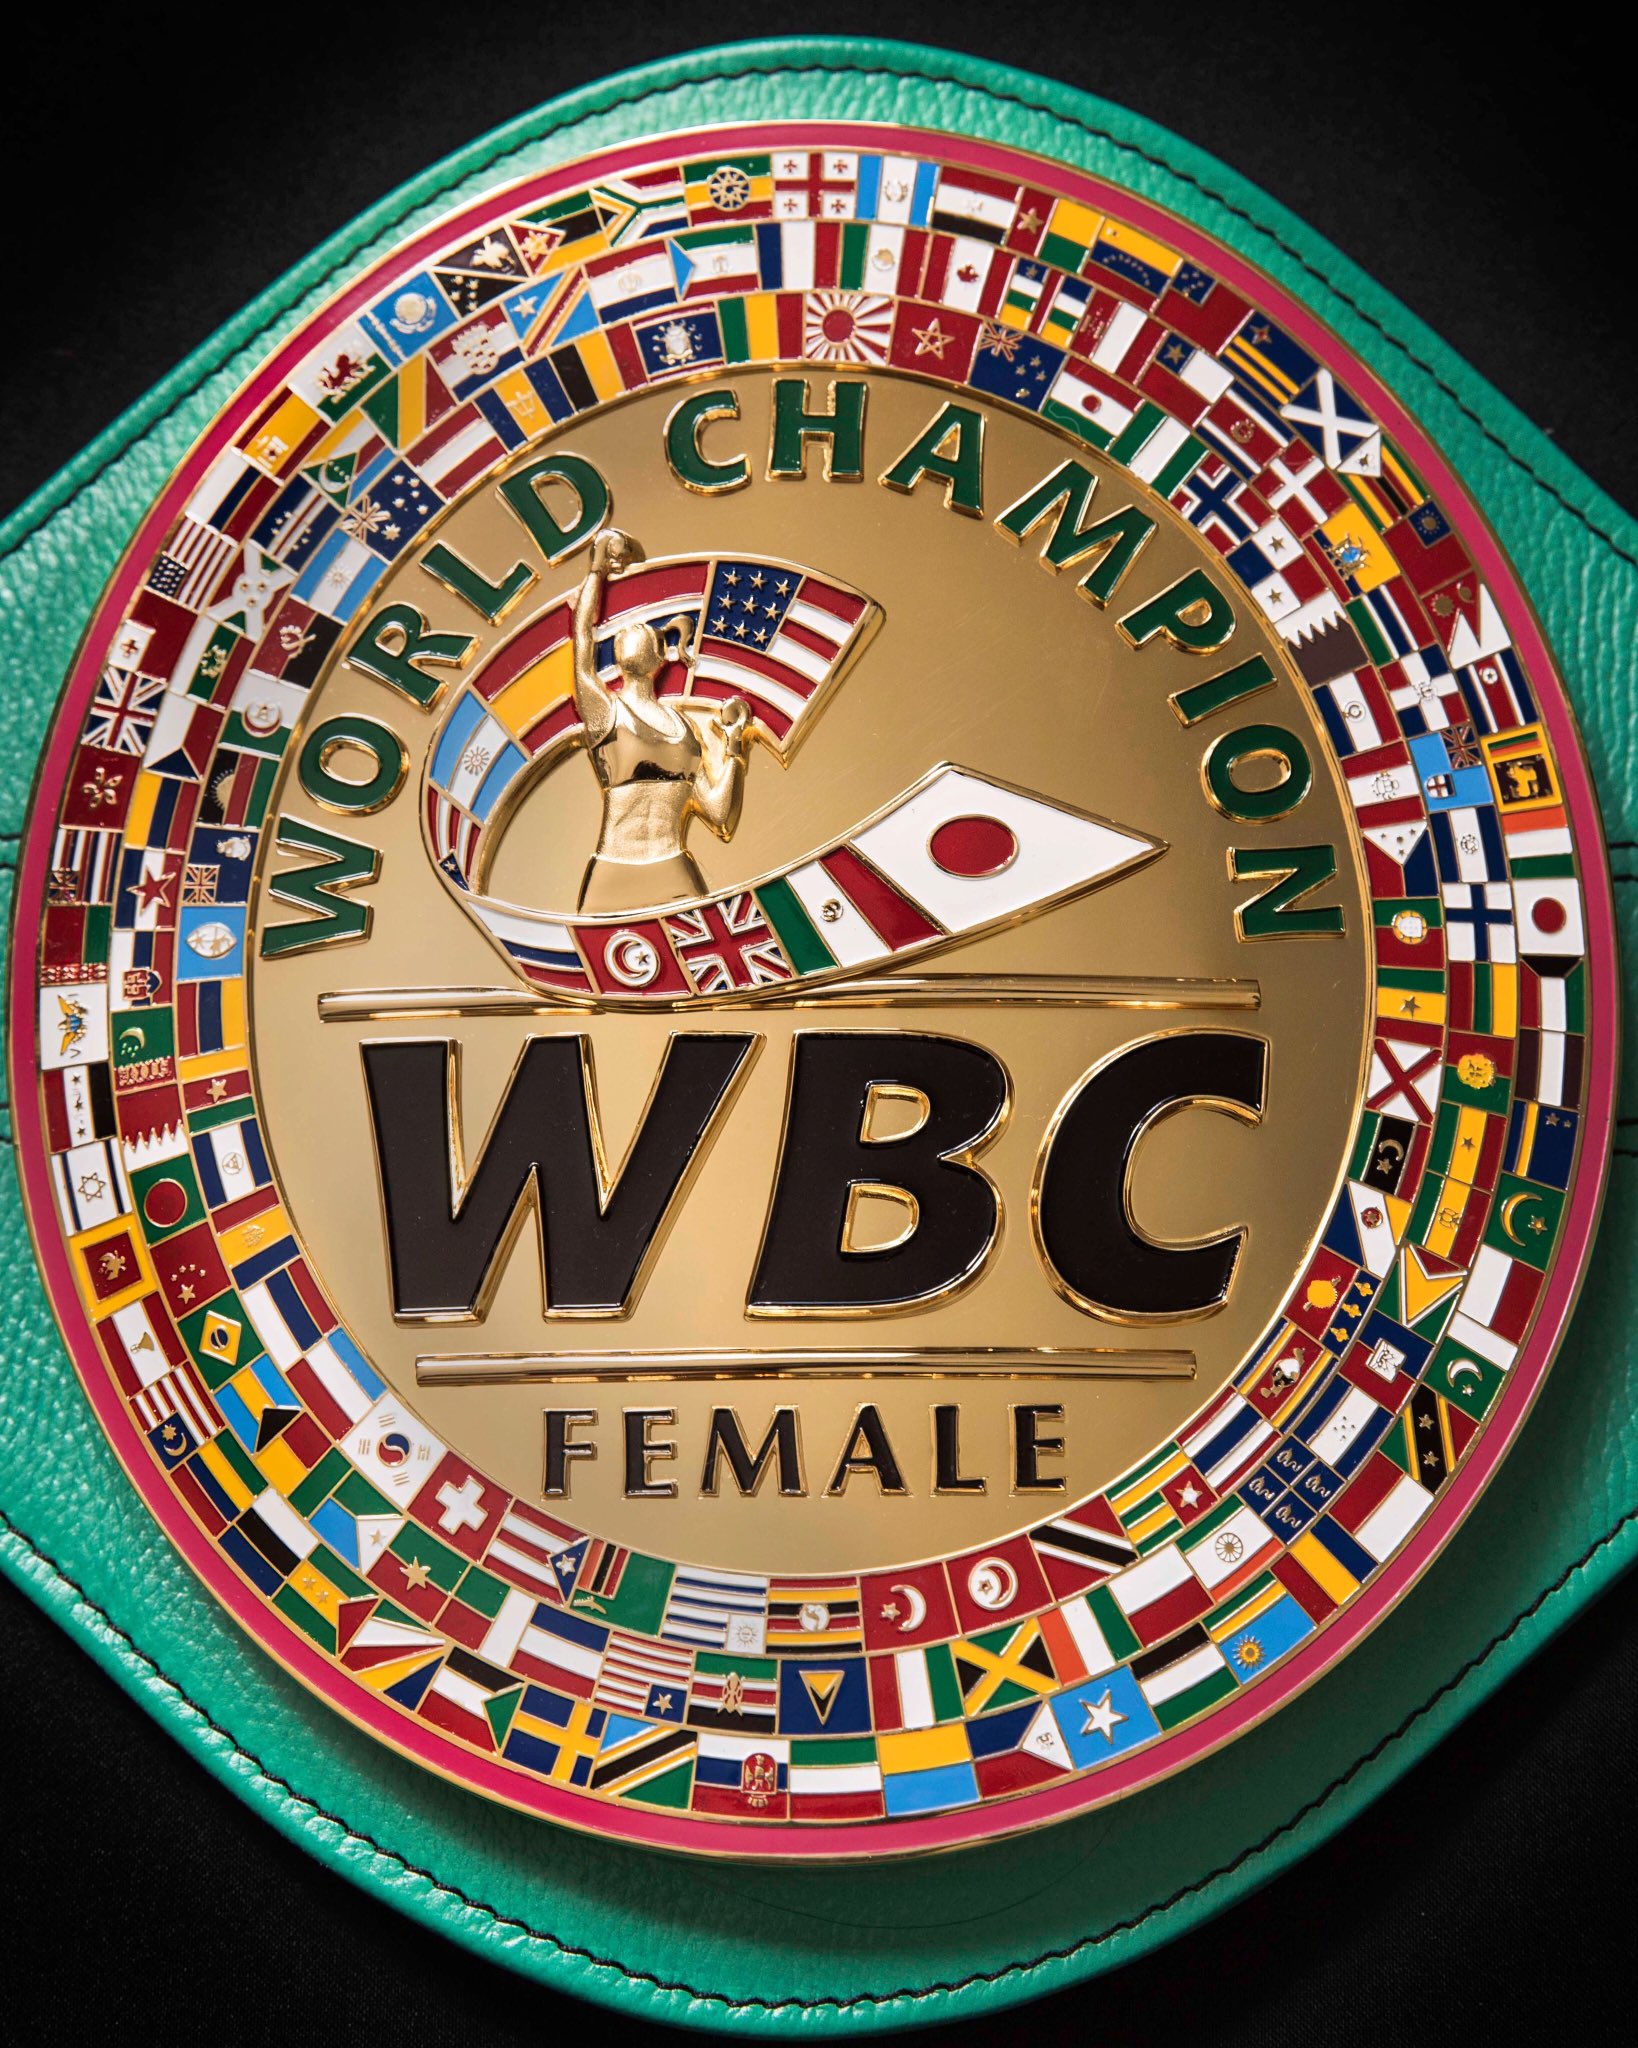 World Boxing Council on Twitter: "EXCLUSIVE: This is the how the new WBC  Female champion's belt looks like! #WBC #Female #Woman  https://t.co/ATqScYdGdX" / Twitter